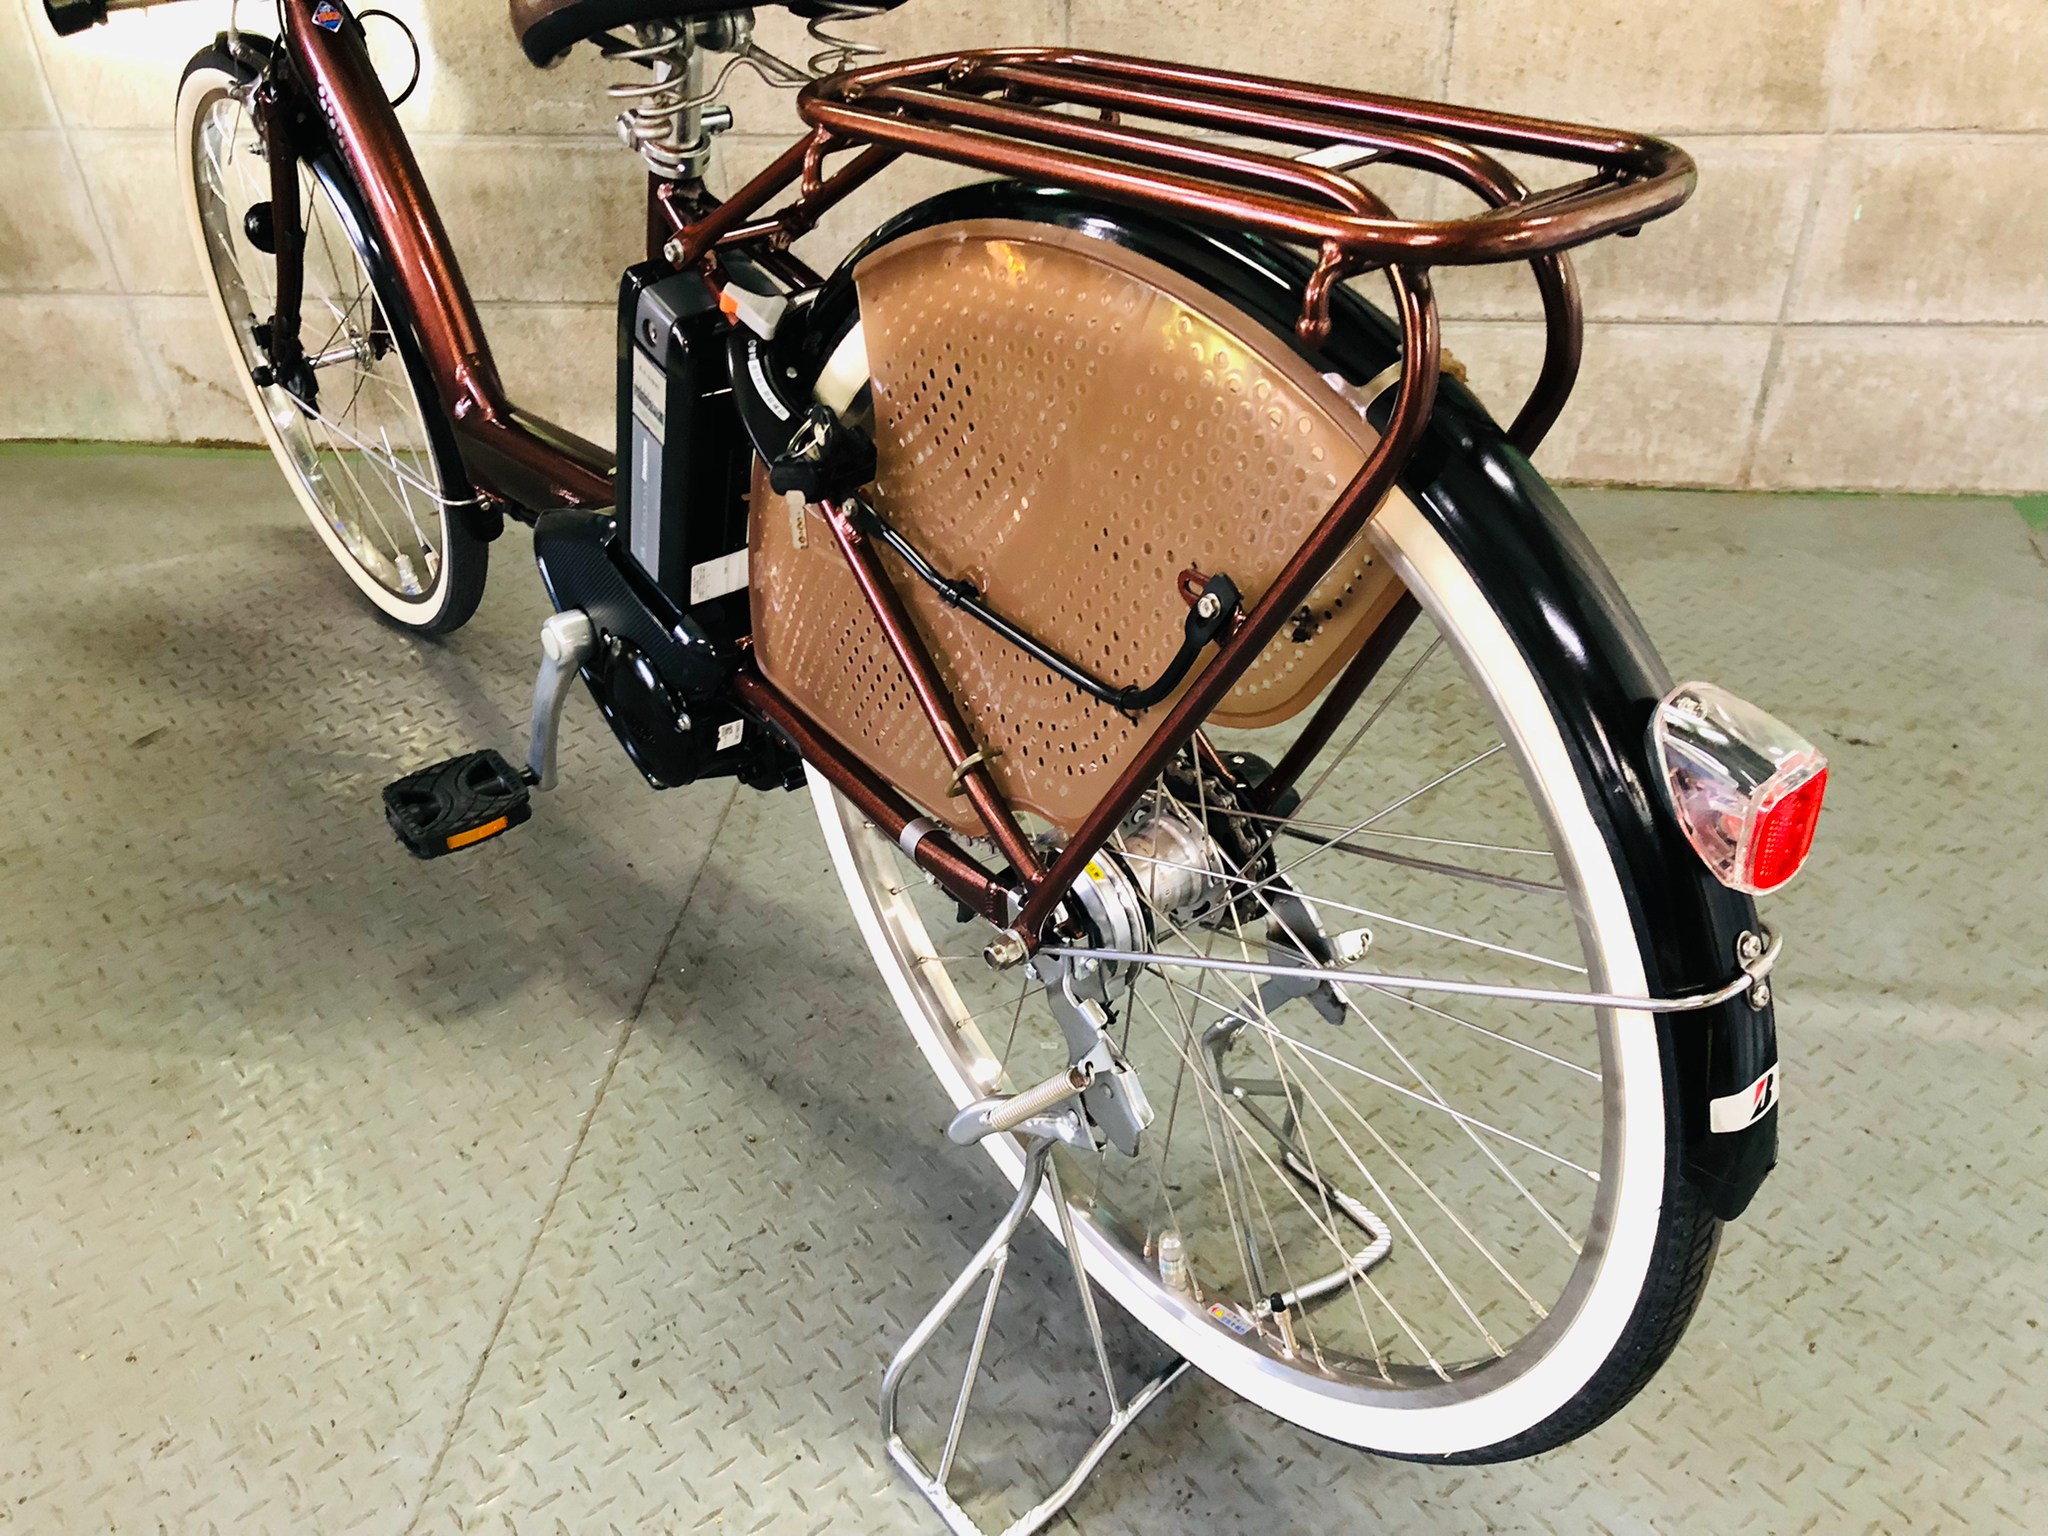 【SOLD OUT】電動自転車 ブリヂストン アンジェリーノ 22/26インチ 子供乗せ 6Ah 茶色 | 国産・中古の激安電動アシスト自転車